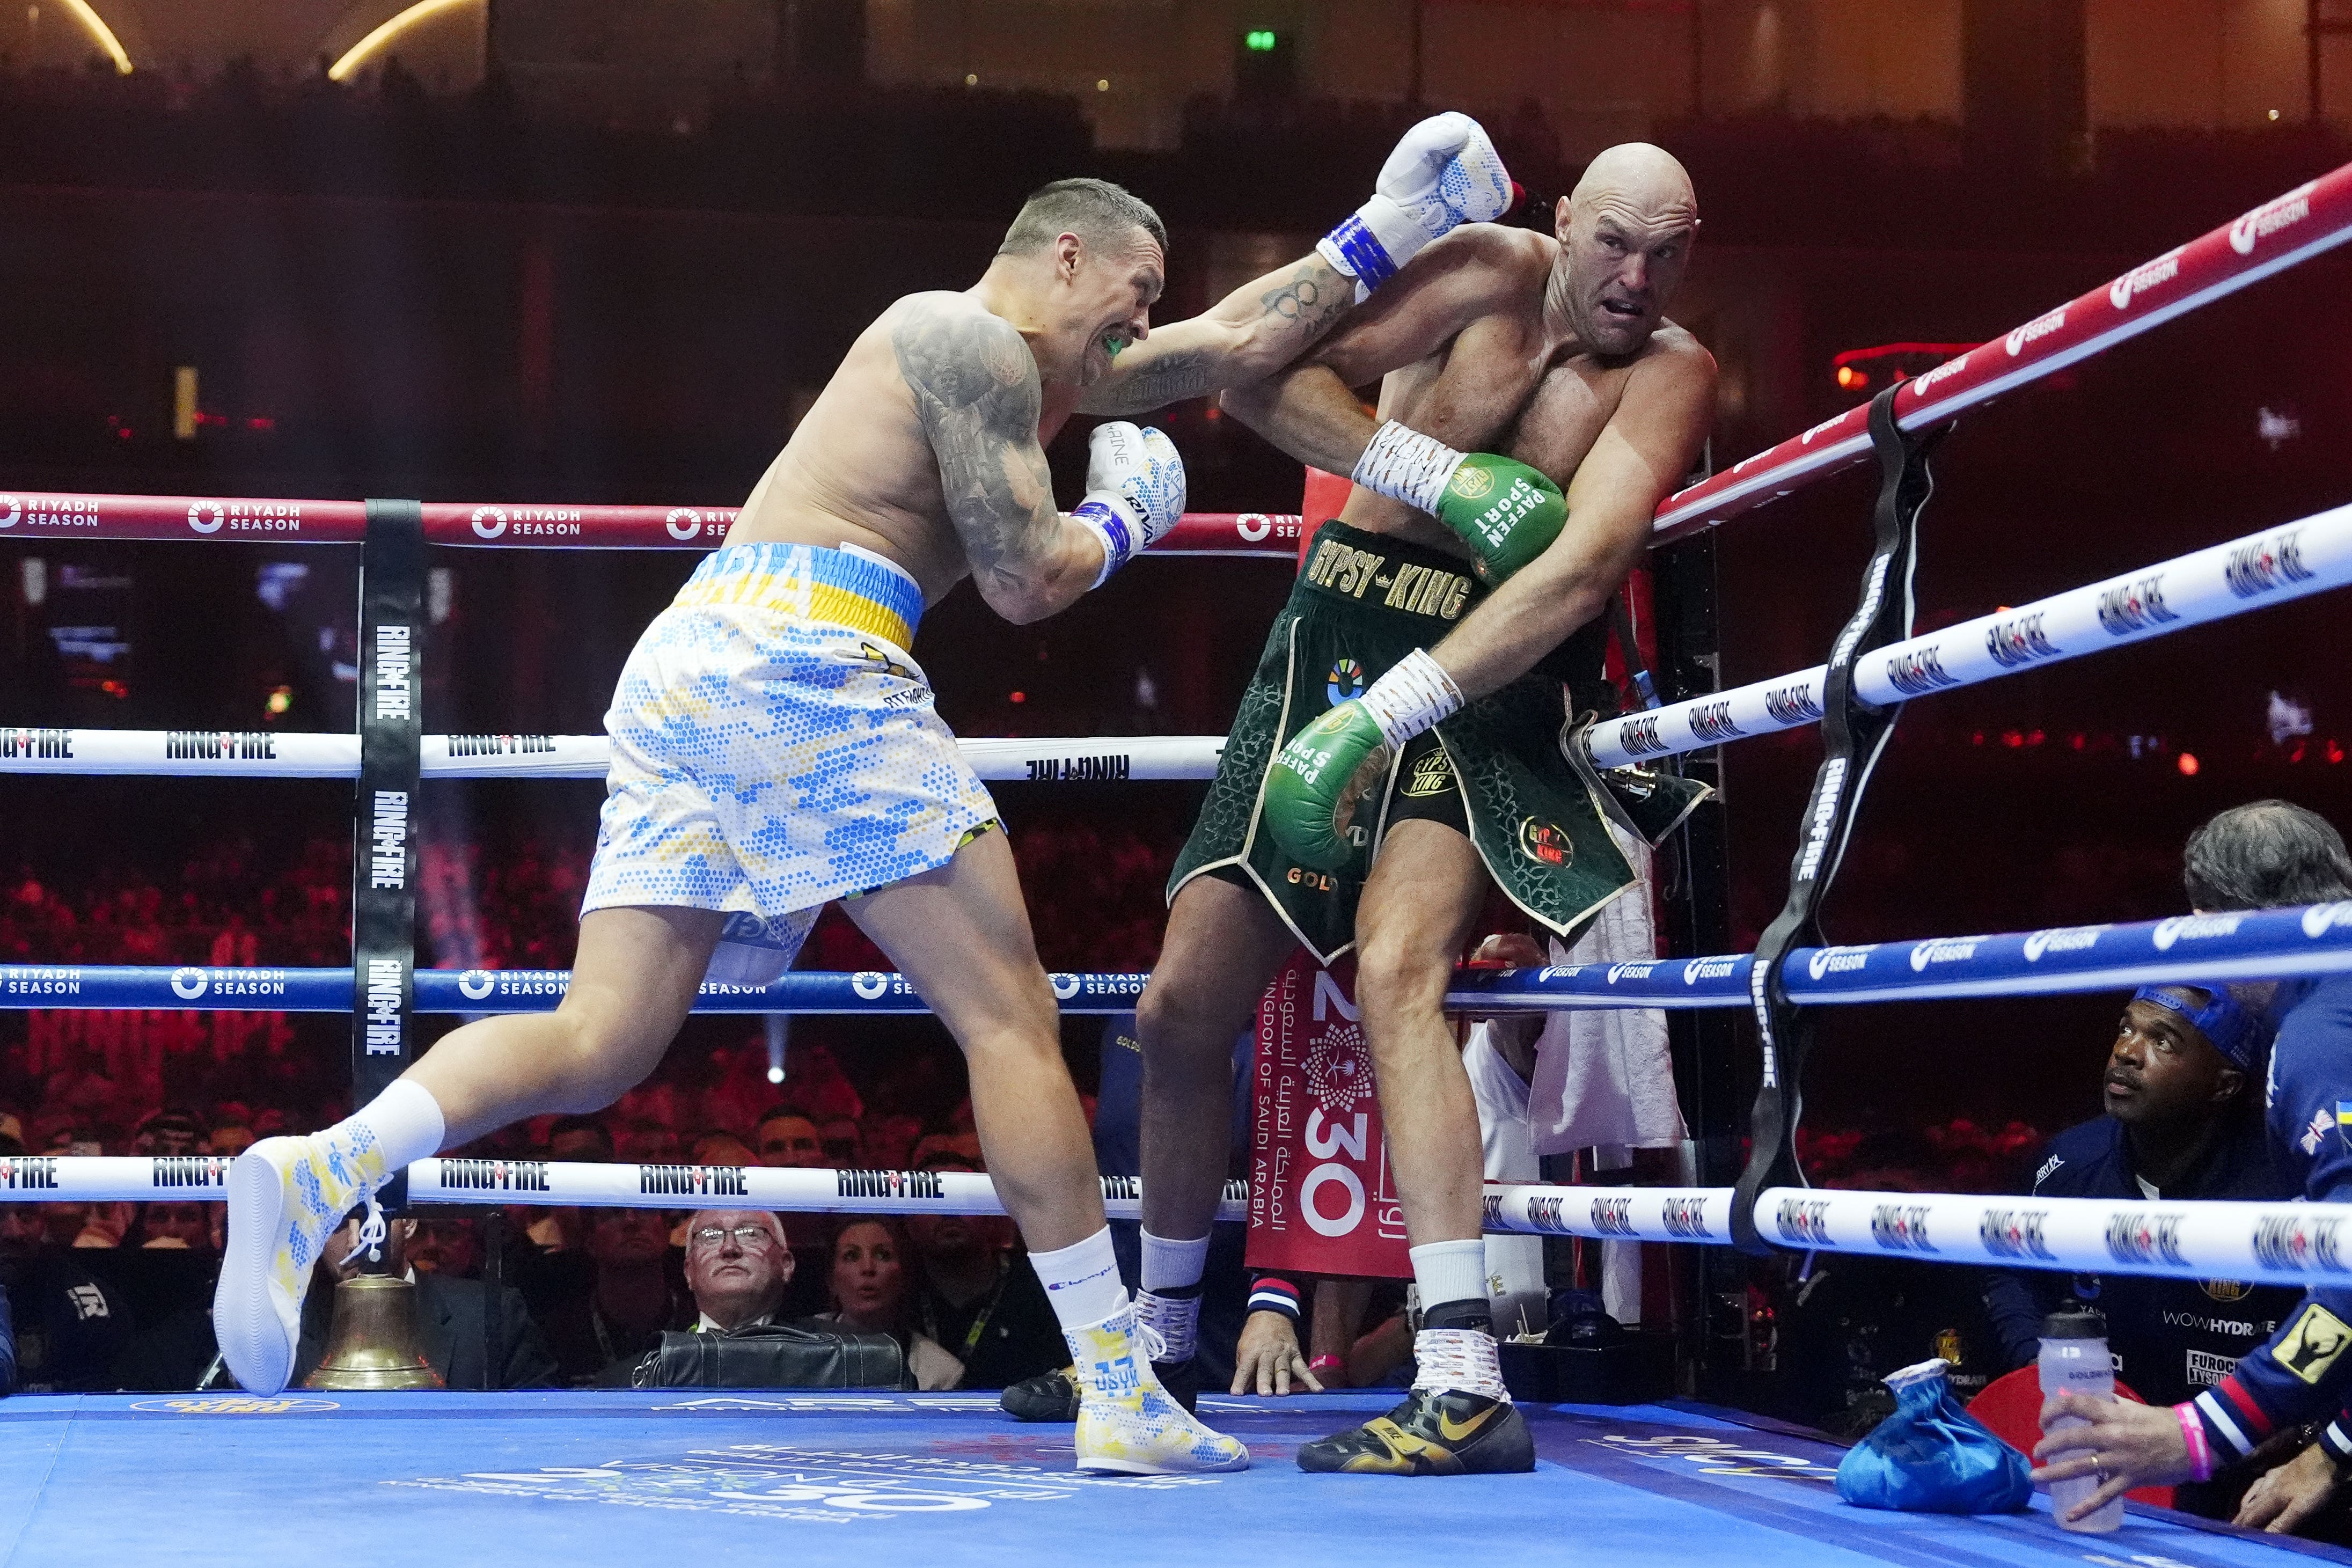 Oleksandr Usyk lands a punch on Tyson Fury during the heavyweight championship fight at Kingdom Arena, Riyadh